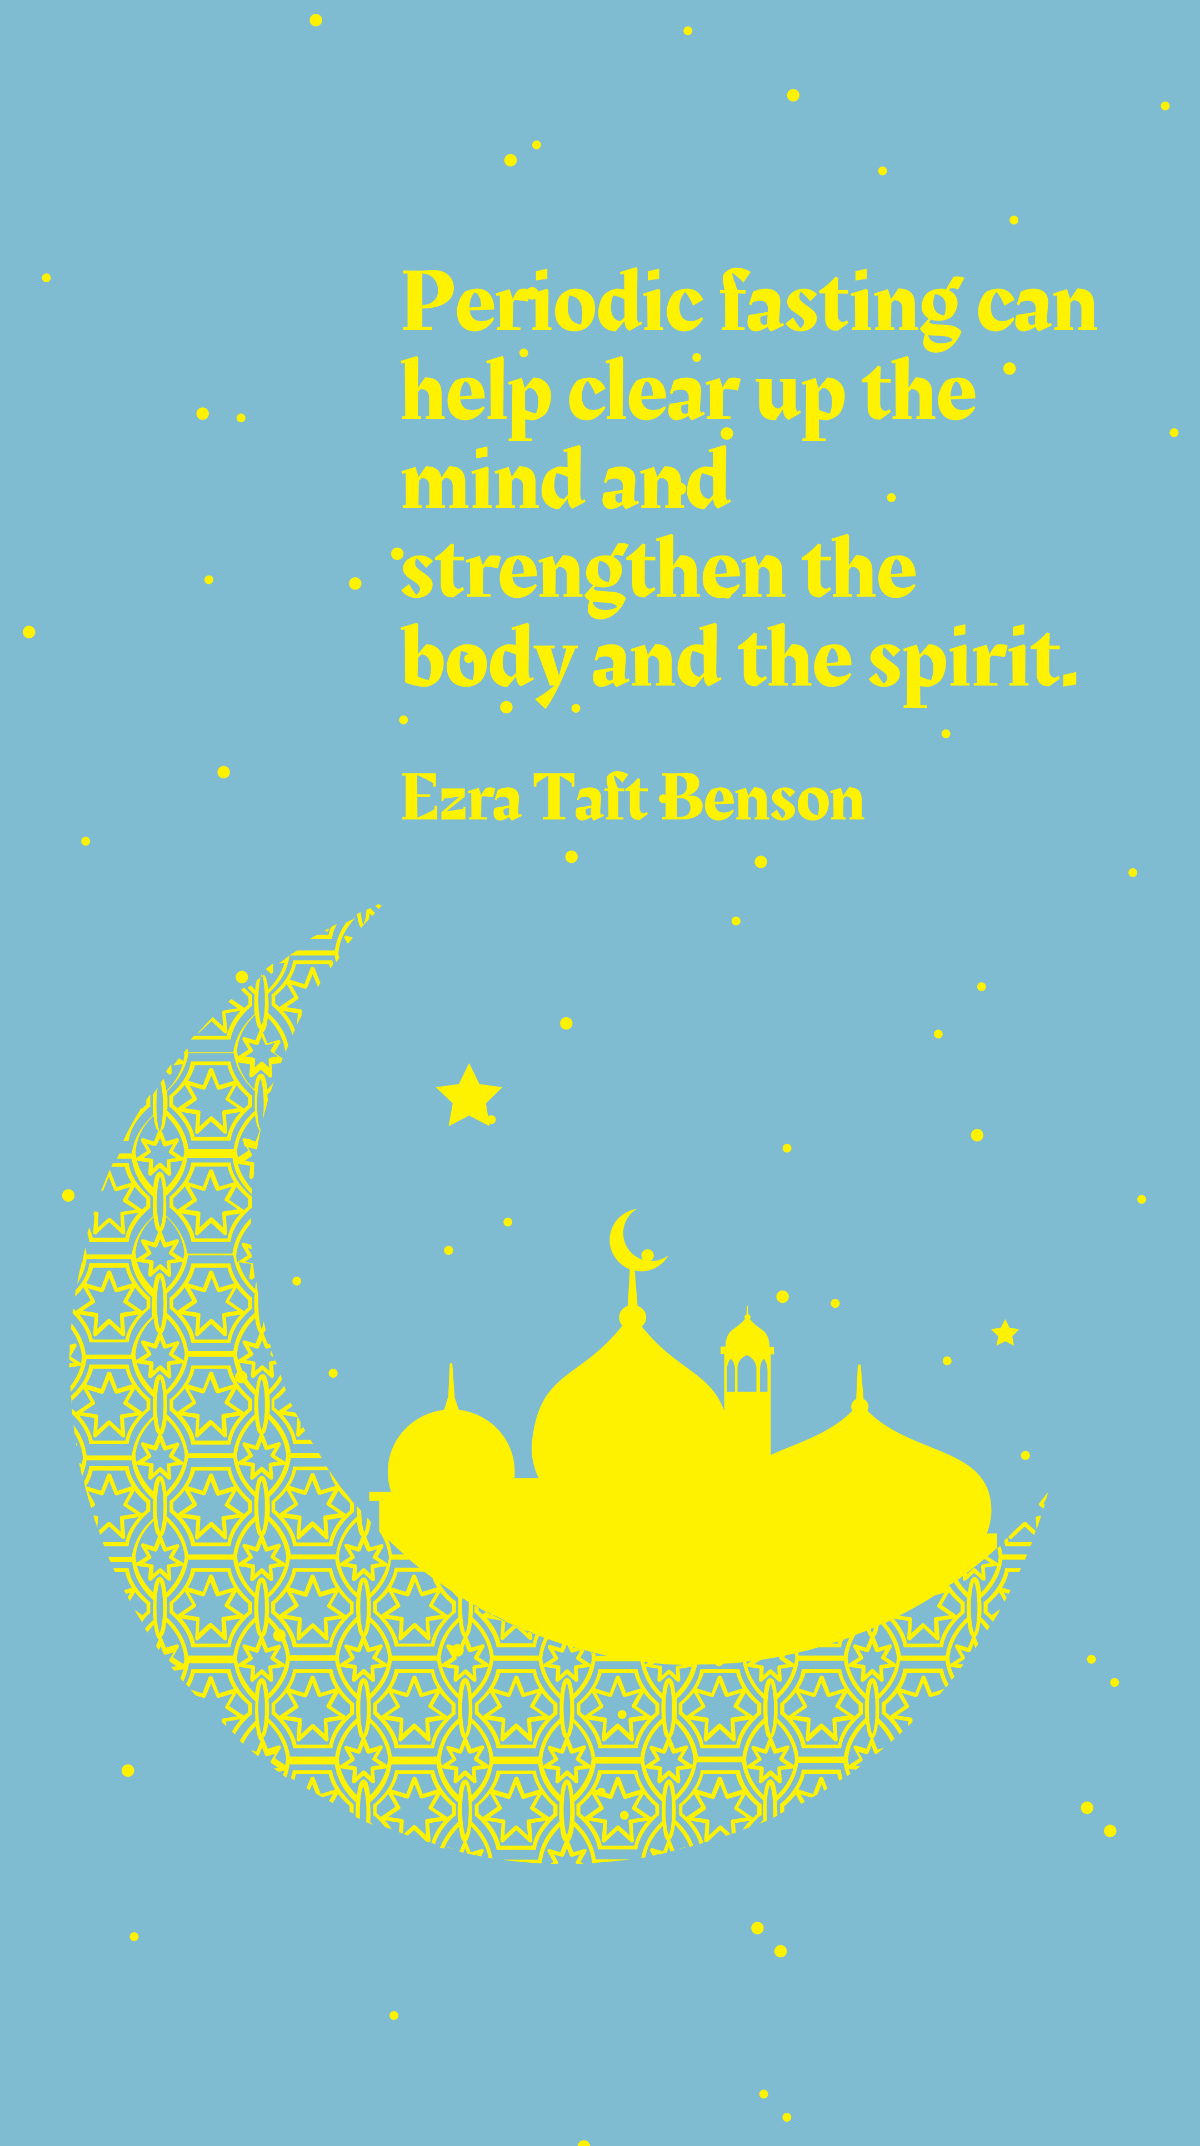 Ezra Taft Benson - Periodic fasting can help clear up the mind and strengthen the body and the spirit. Template